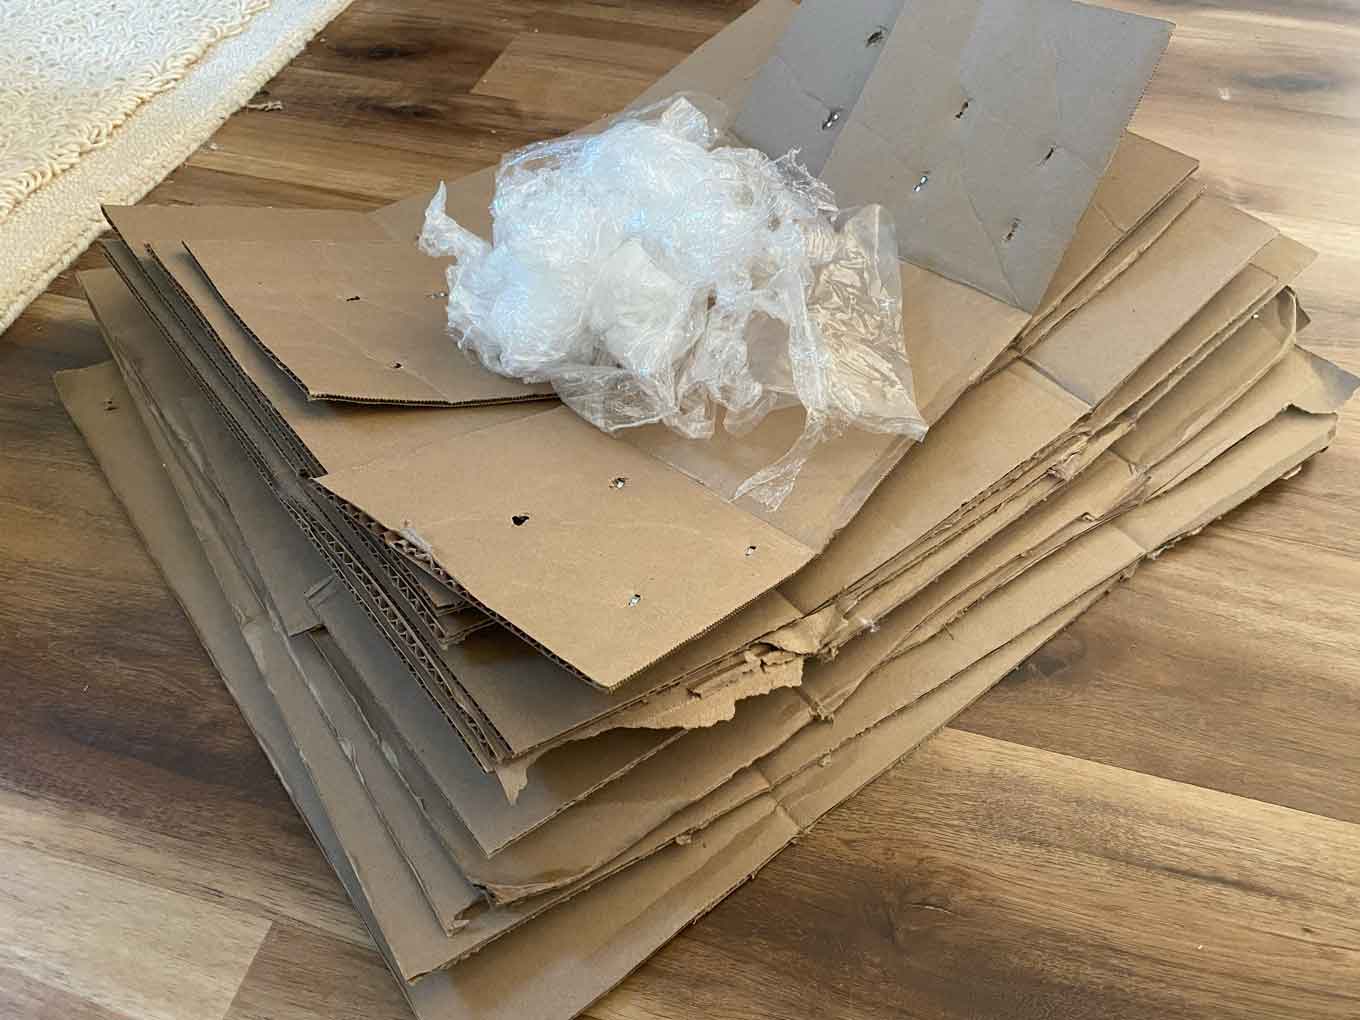 A pile of cardboard packaging with a small amount of plastic